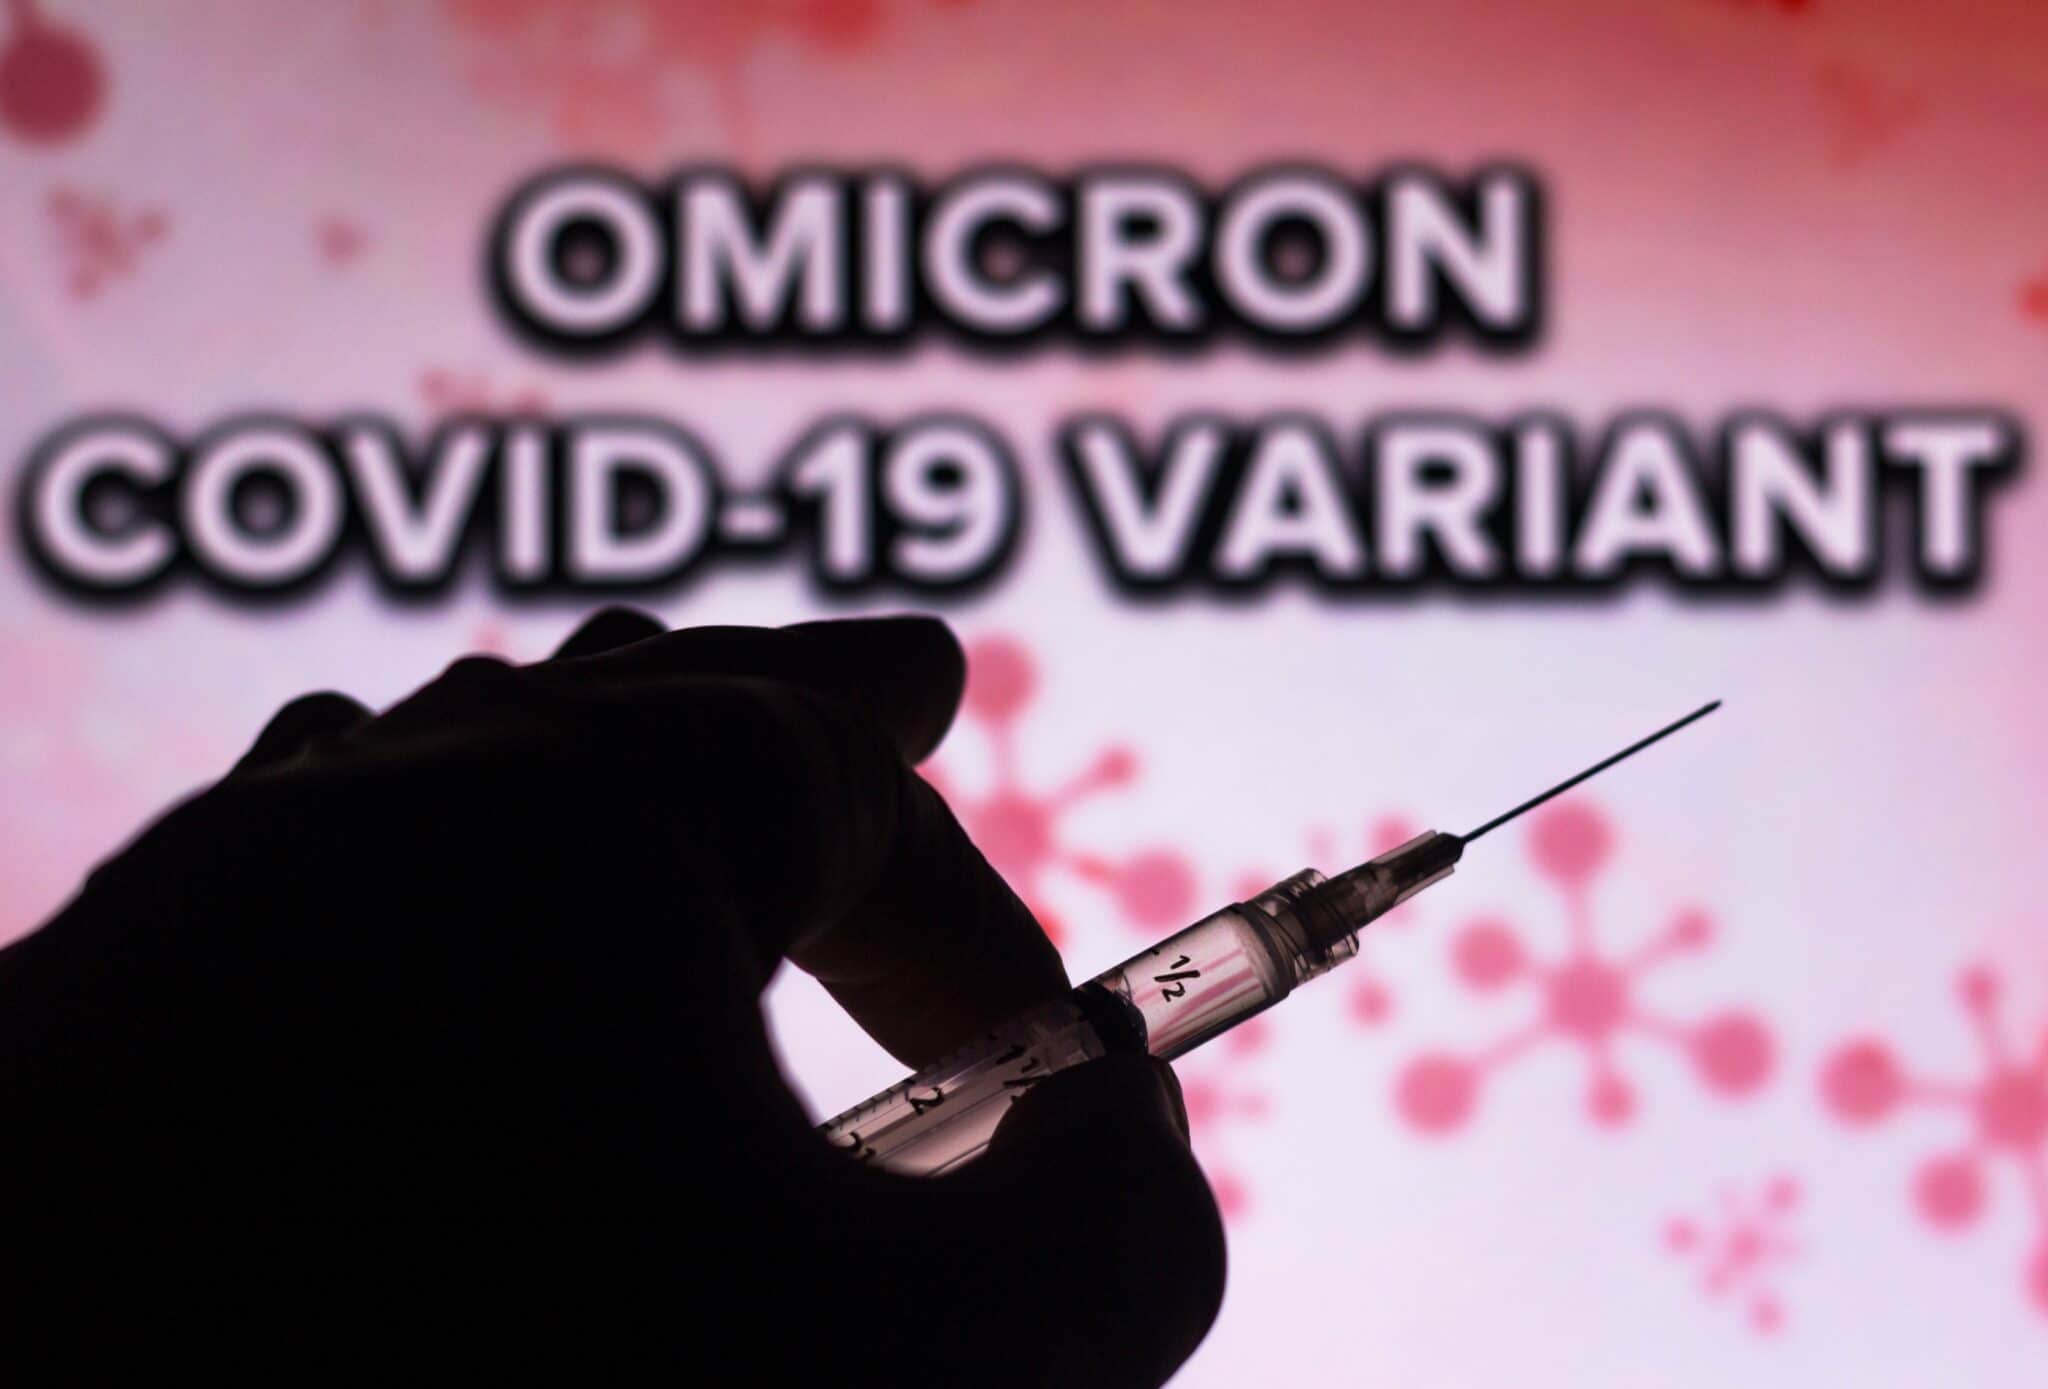 Georgia resident tests positive for Omicron variant